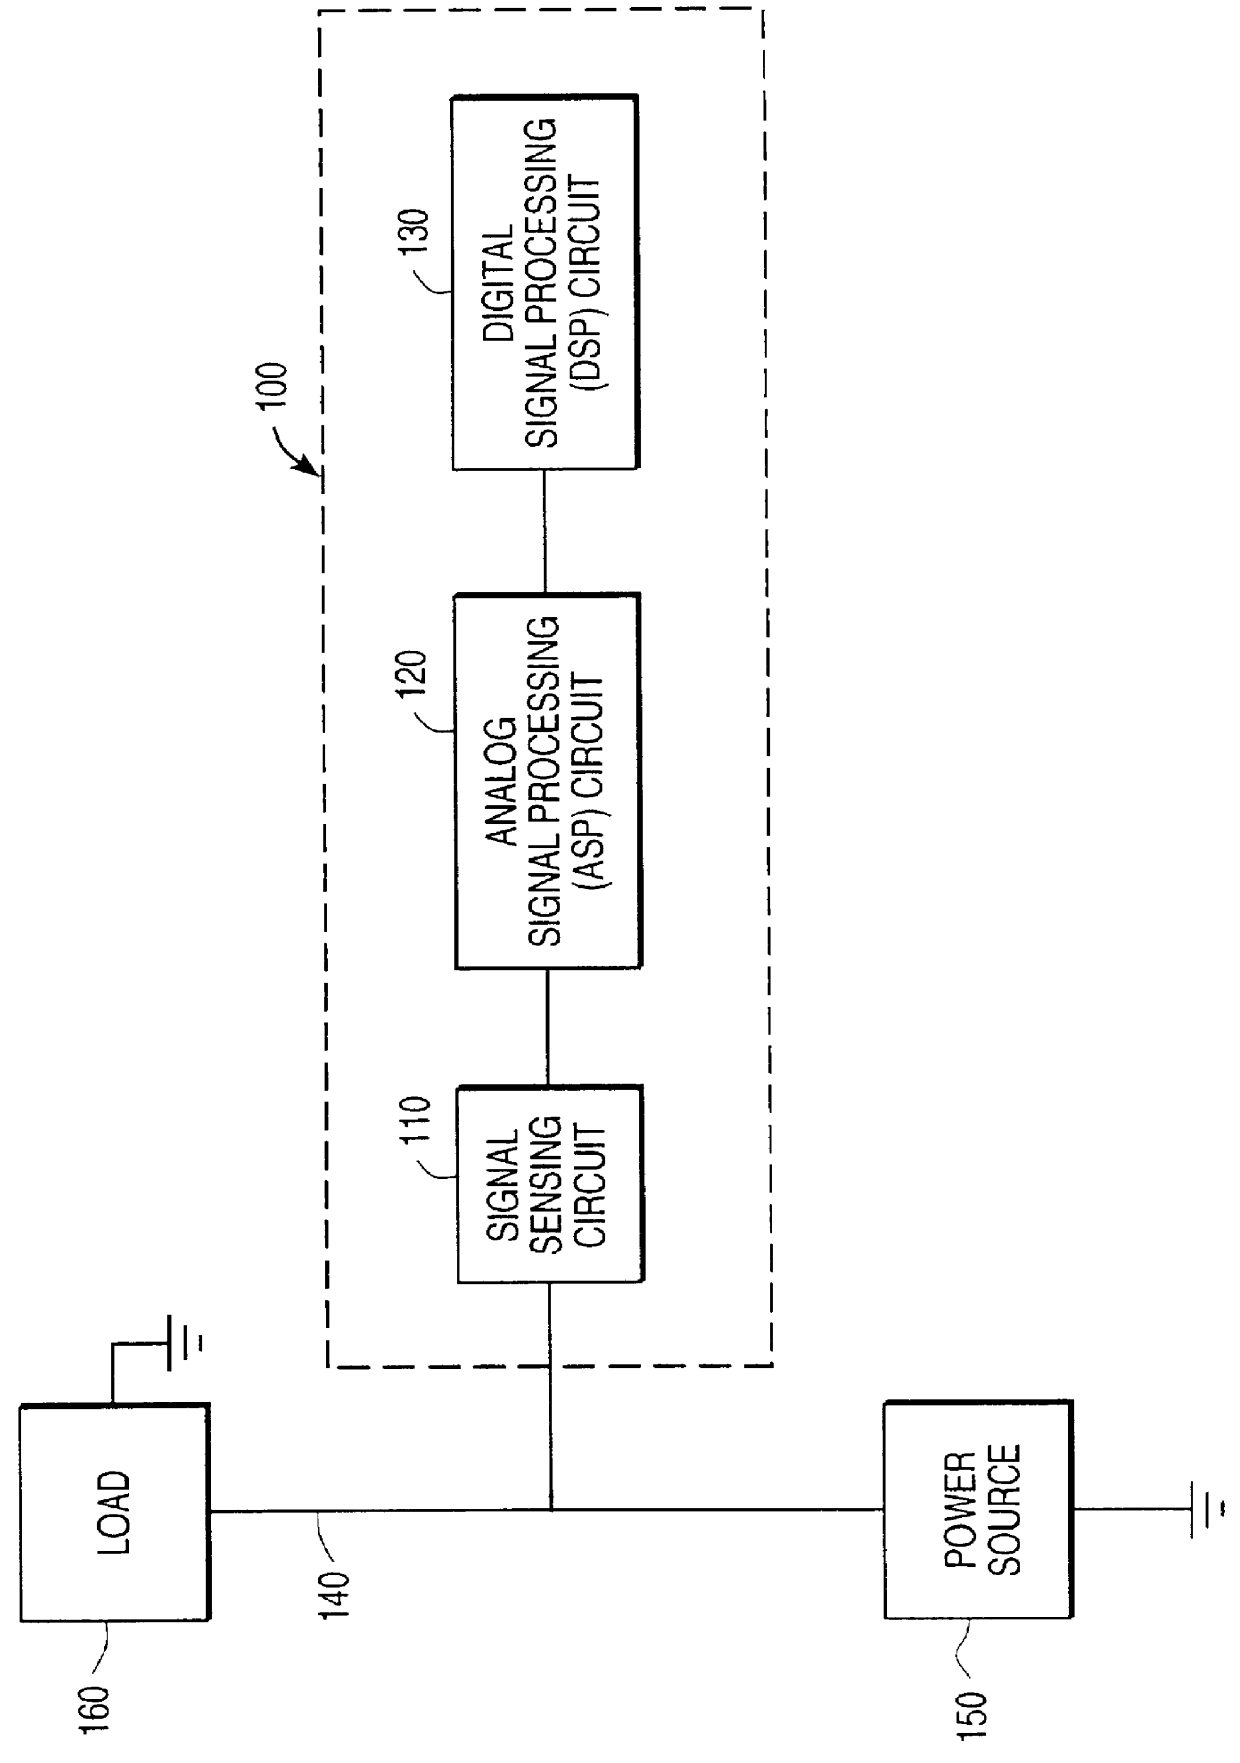 Method and apparatus for monitoring parameters of an RF powered load in the presence of harmonics